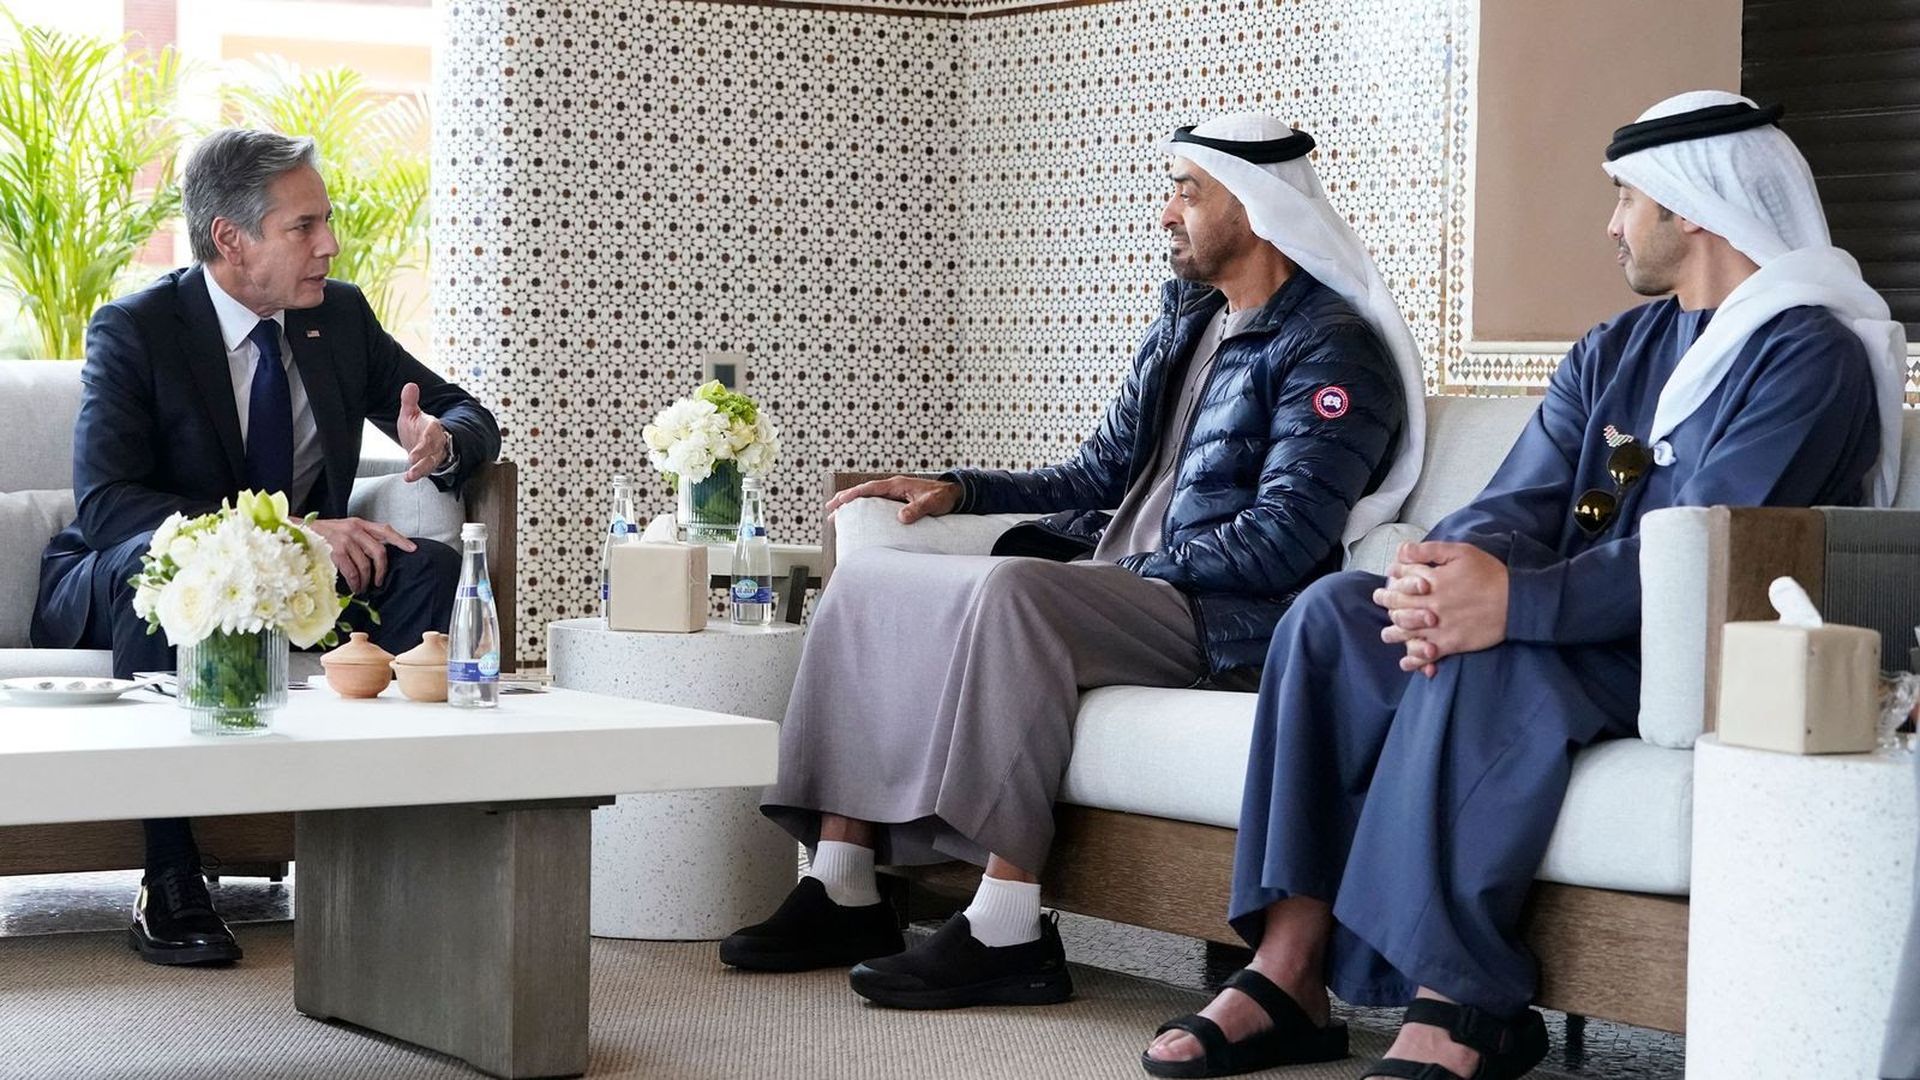 Blinken meets with Abu Dhabi Crown Prince Mohammed bin Zayed at his residence in Rabat, Morocco. Photo: Jacquelyn Martin/AFP via Getty Images